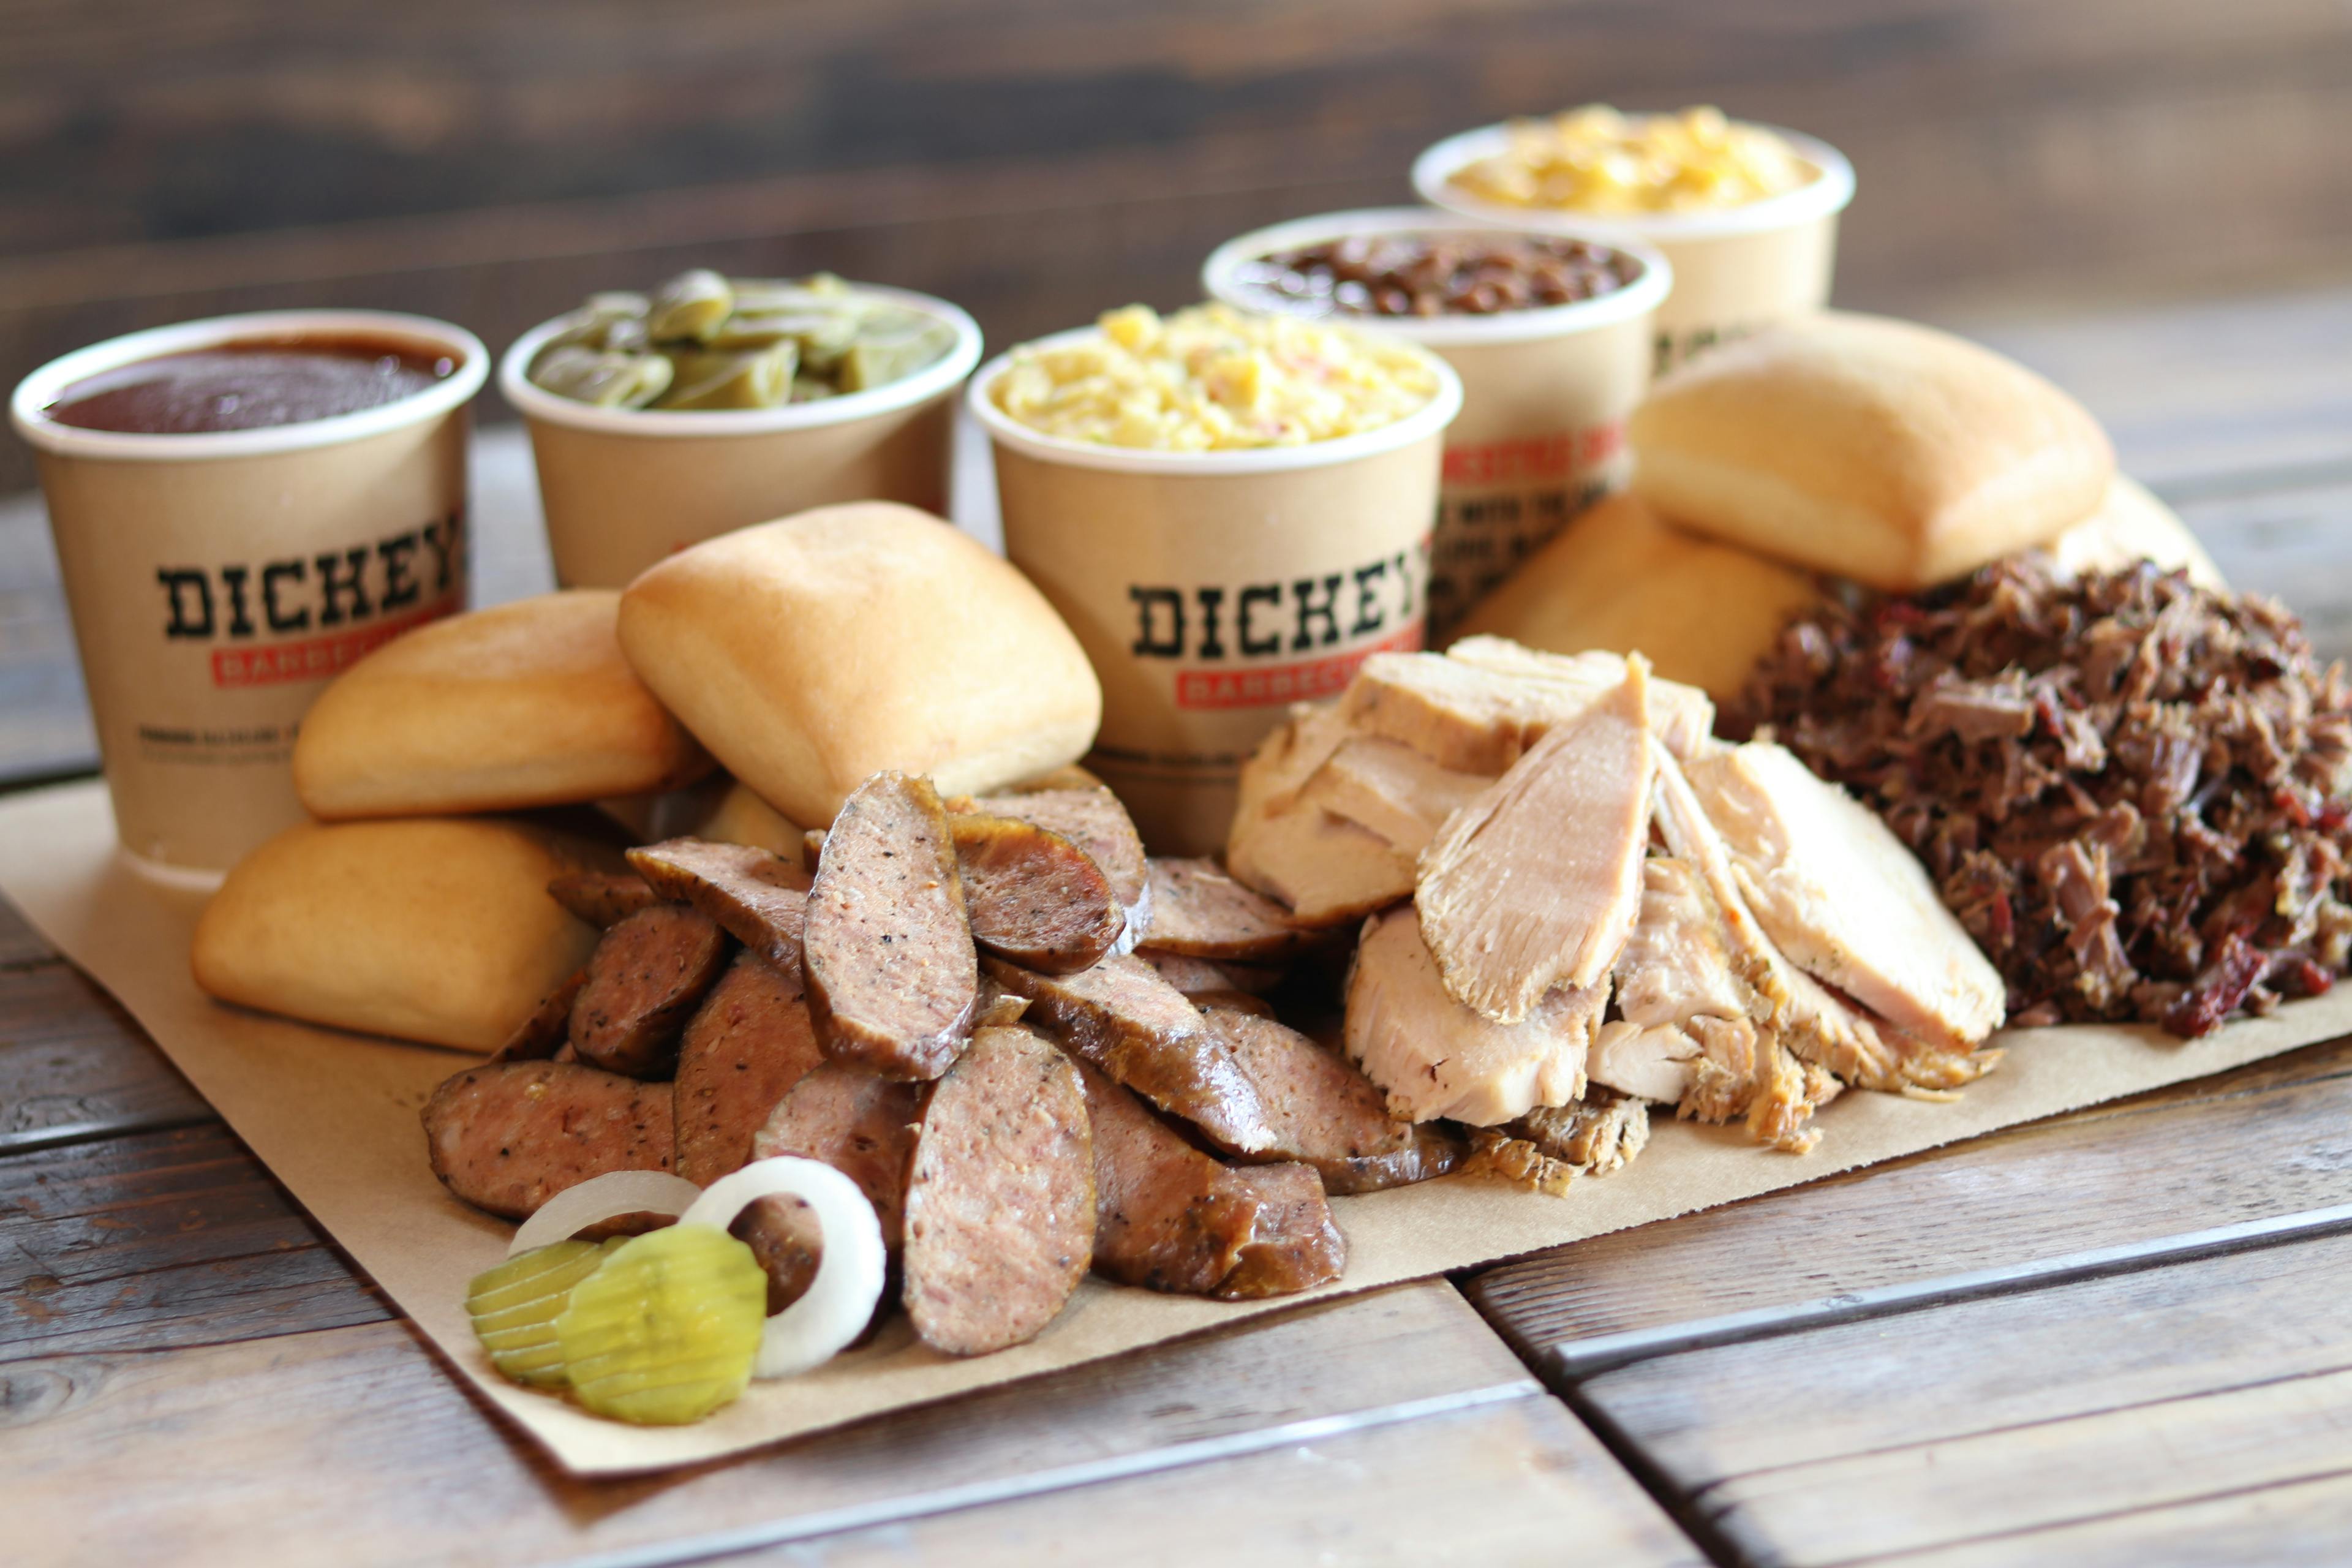 Dickey’s Barbecue Pit Brings Texas-Style Barbecue To Its 44th State in the Nation